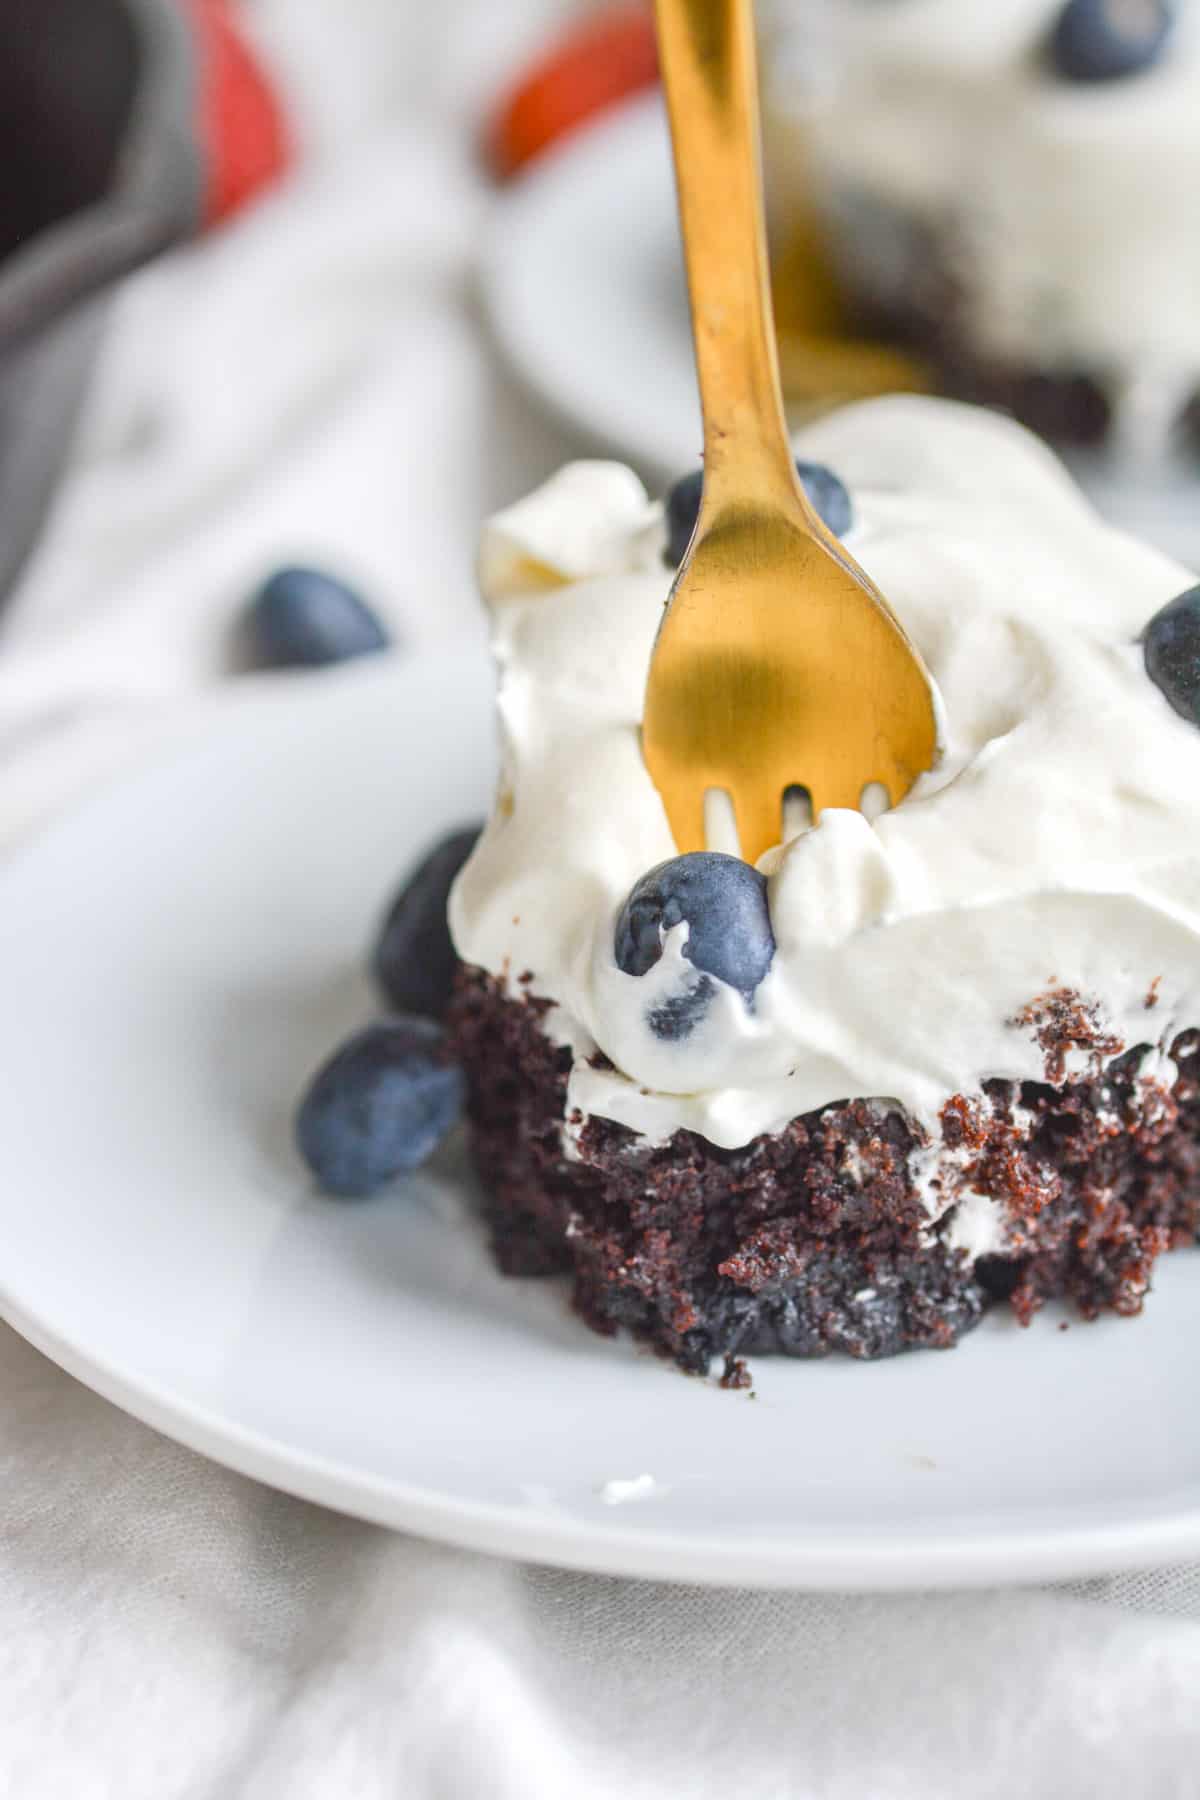 A fork in a vegan chocolate blueberry cake.